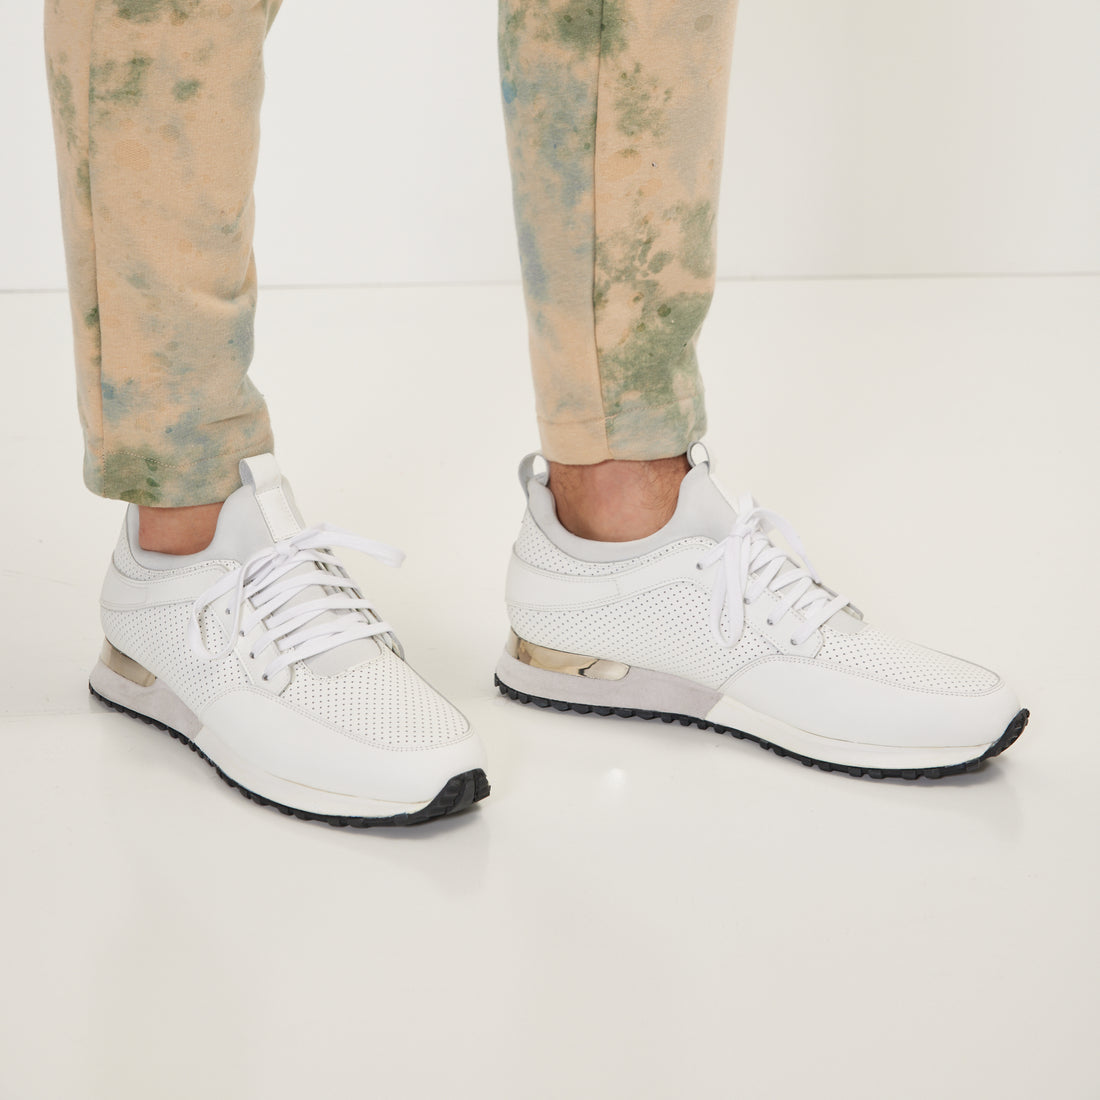 N°  D0532 THE PERFORATED LEATHER RUNNER SNEAKER - WHITE